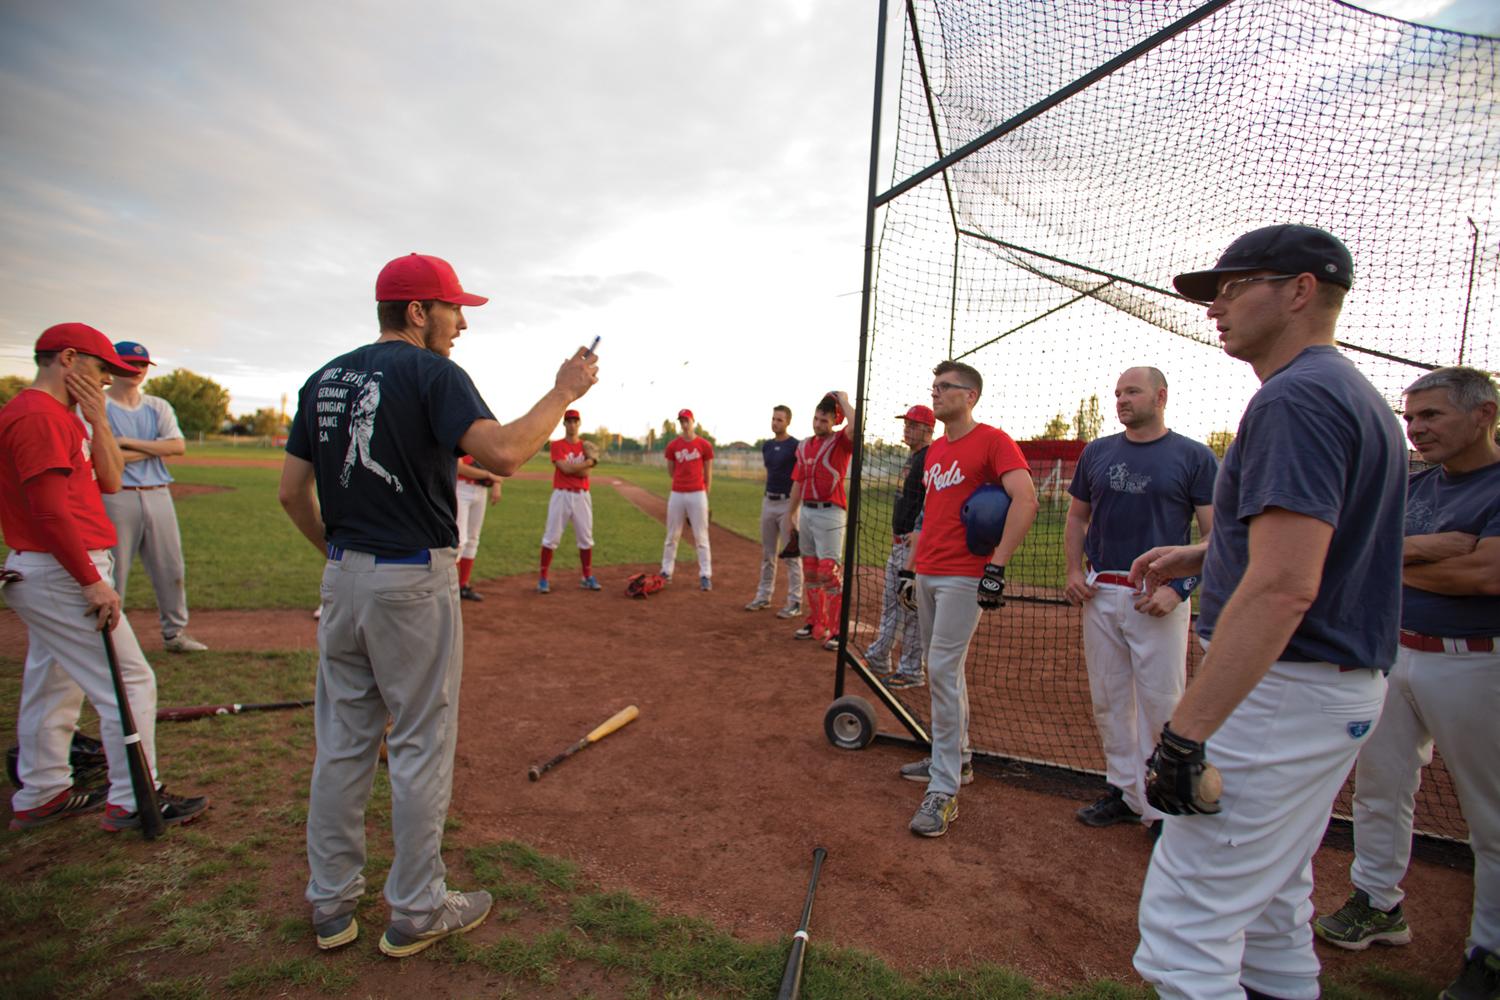 Canadian Baseball Devotee Brings Love Of Game To Hungary